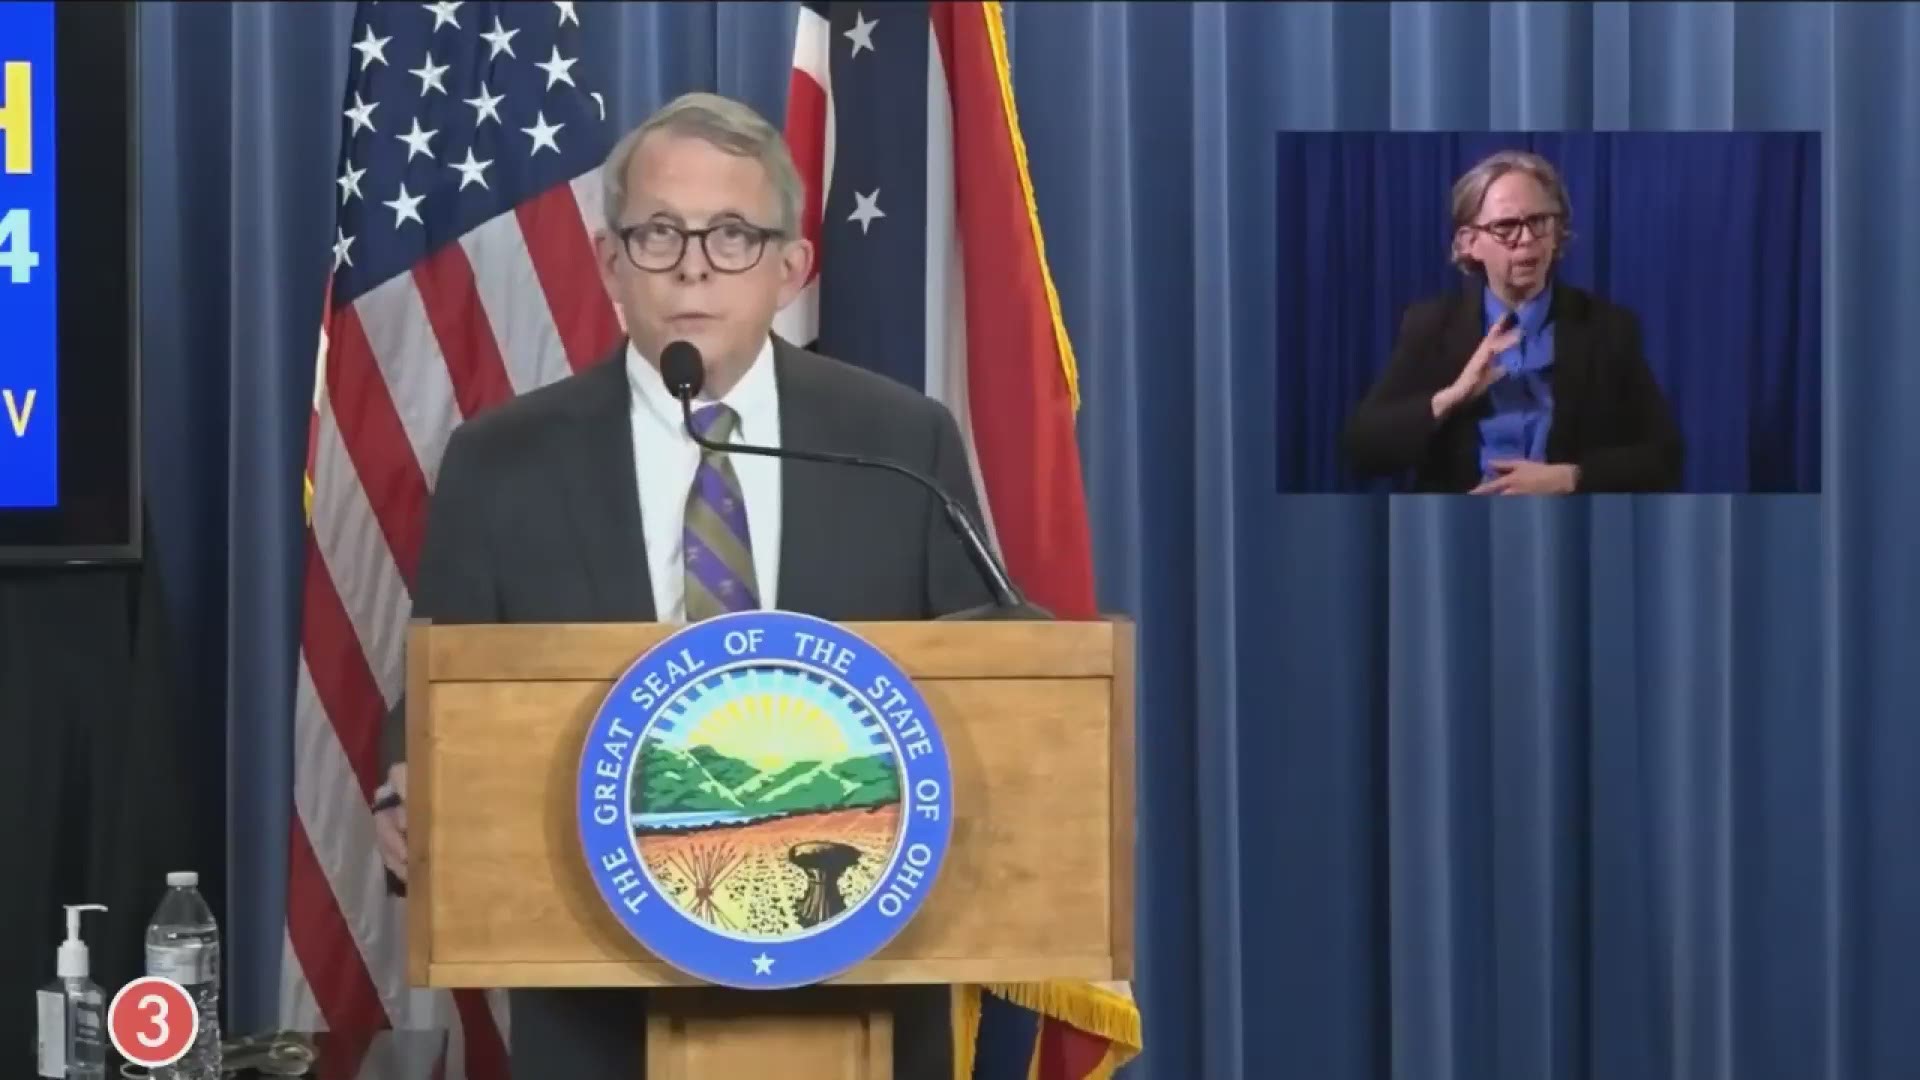 'We’ve really encouraged every business that has had people working from home to continue to do that,' Ohio Gov. Mike DeWine said.